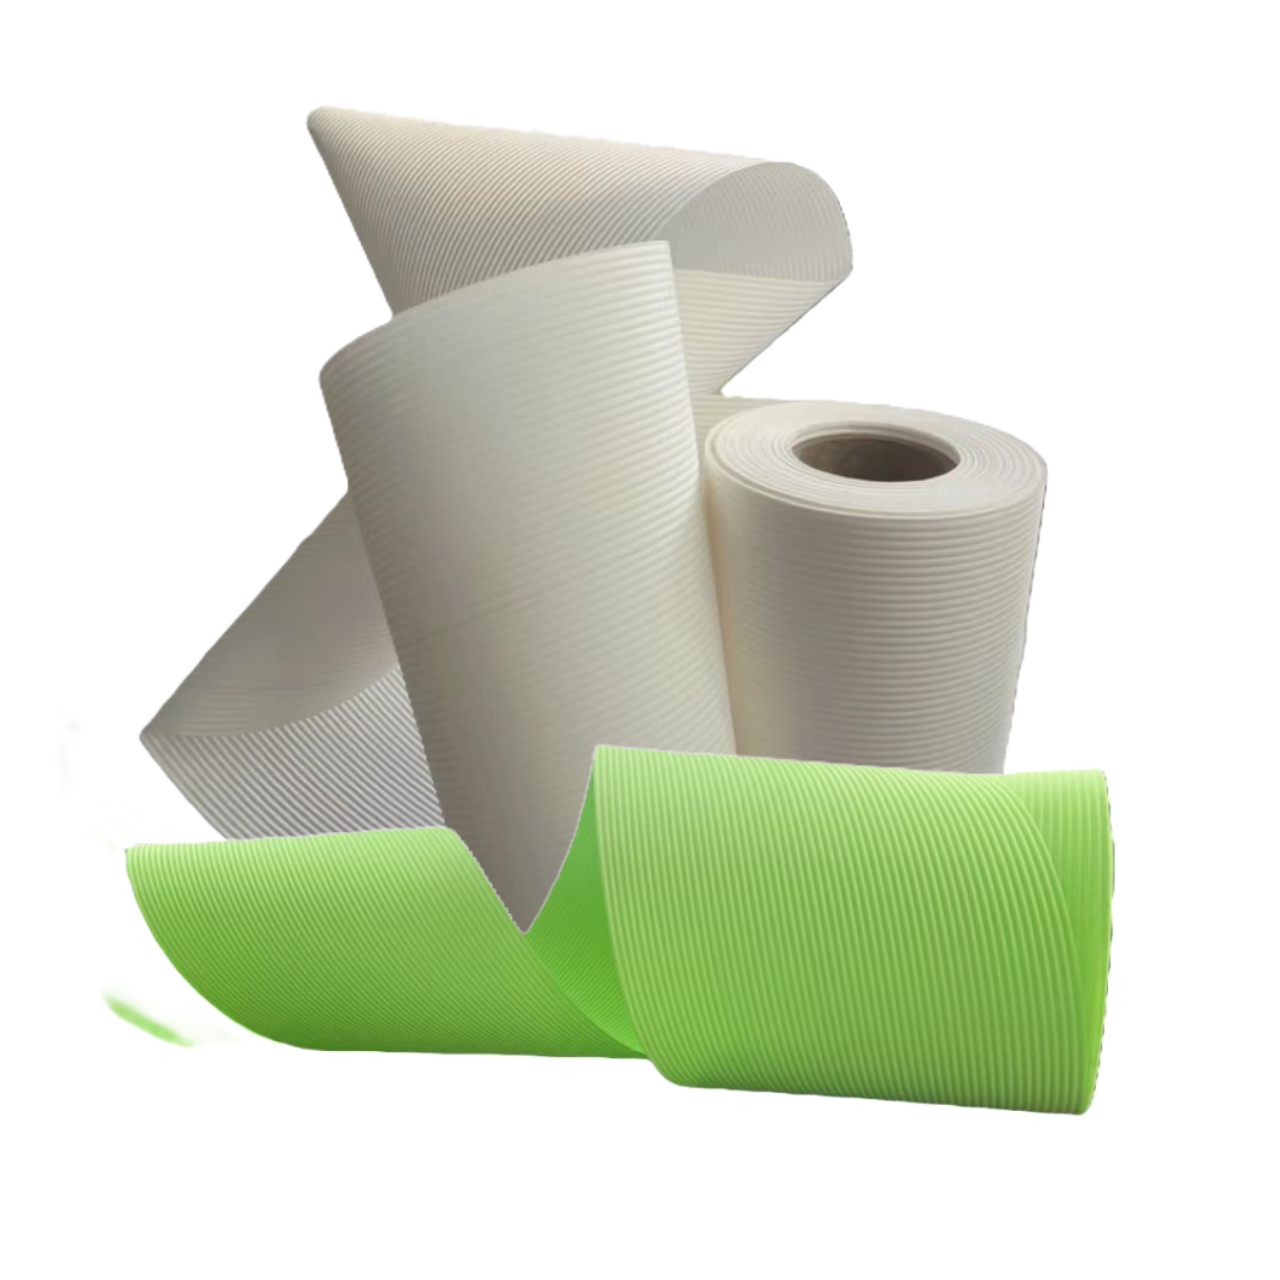 What are the characteristics of air filter paper